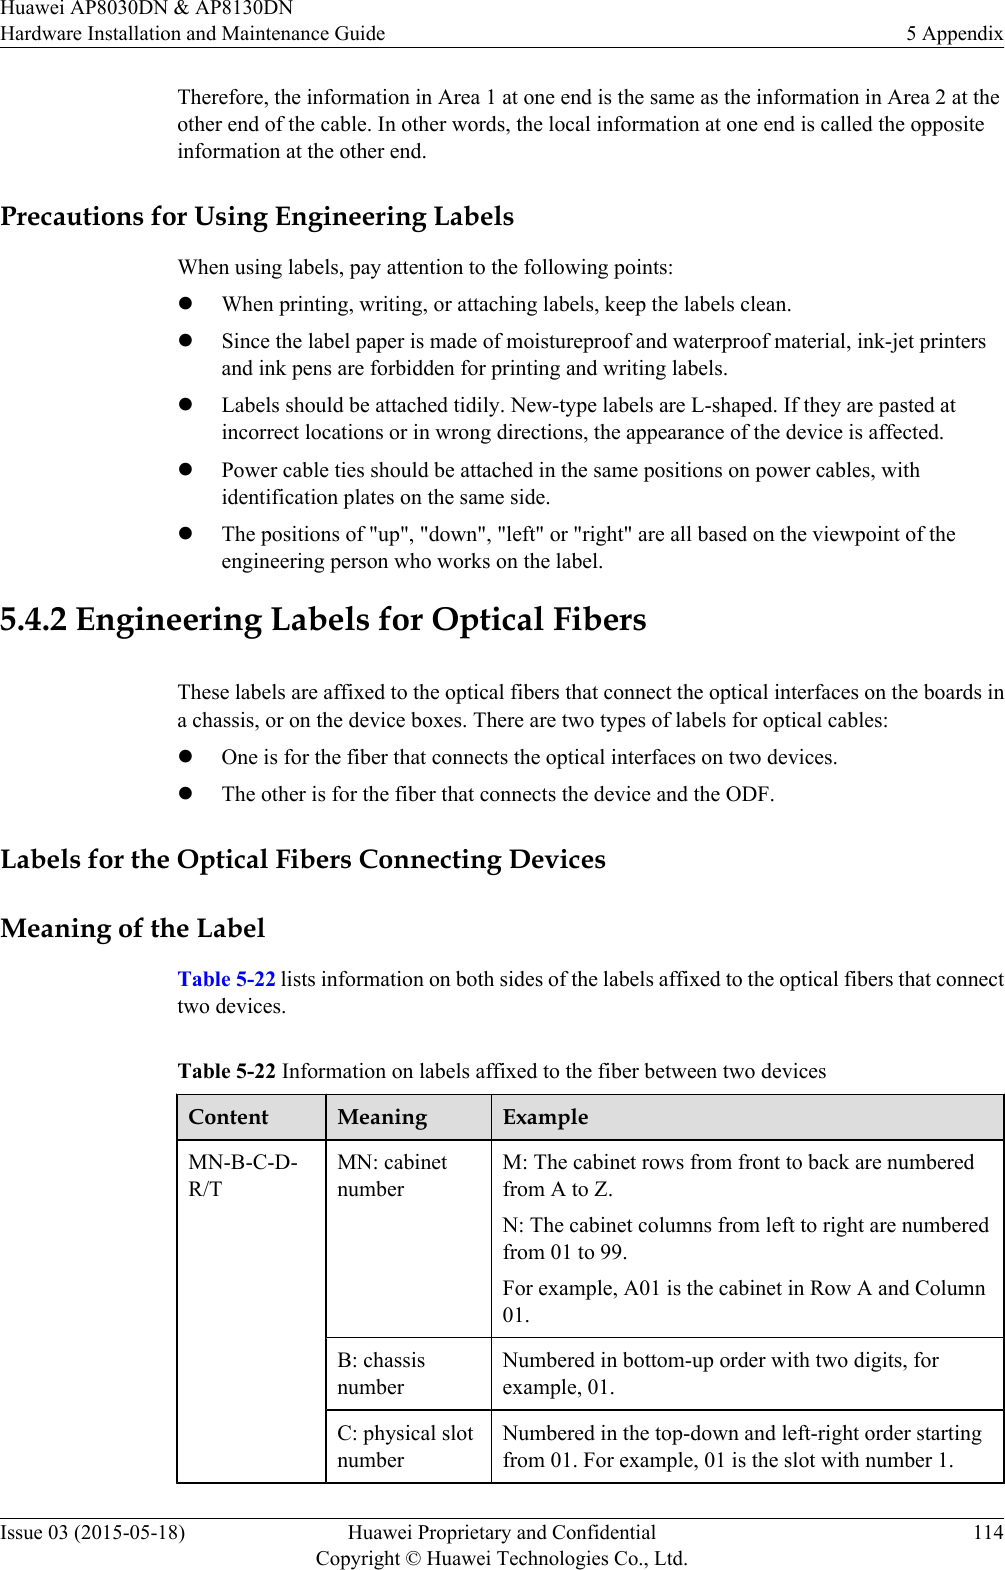 Therefore, the information in Area 1 at one end is the same as the information in Area 2 at theother end of the cable. In other words, the local information at one end is called the oppositeinformation at the other end.Precautions for Using Engineering LabelsWhen using labels, pay attention to the following points:lWhen printing, writing, or attaching labels, keep the labels clean.lSince the label paper is made of moistureproof and waterproof material, ink-jet printersand ink pens are forbidden for printing and writing labels.lLabels should be attached tidily. New-type labels are L-shaped. If they are pasted atincorrect locations or in wrong directions, the appearance of the device is affected.lPower cable ties should be attached in the same positions on power cables, withidentification plates on the same side.lThe positions of &quot;up&quot;, &quot;down&quot;, &quot;left&quot; or &quot;right&quot; are all based on the viewpoint of theengineering person who works on the label.5.4.2 Engineering Labels for Optical FibersThese labels are affixed to the optical fibers that connect the optical interfaces on the boards ina chassis, or on the device boxes. There are two types of labels for optical cables:lOne is for the fiber that connects the optical interfaces on two devices.lThe other is for the fiber that connects the device and the ODF.Labels for the Optical Fibers Connecting DevicesMeaning of the LabelTable 5-22 lists information on both sides of the labels affixed to the optical fibers that connecttwo devices.Table 5-22 Information on labels affixed to the fiber between two devicesContent Meaning ExampleMN-B-C-D-R/TMN: cabinetnumberM: The cabinet rows from front to back are numberedfrom A to Z.N: The cabinet columns from left to right are numberedfrom 01 to 99.For example, A01 is the cabinet in Row A and Column01.B: chassisnumberNumbered in bottom-up order with two digits, forexample, 01.C: physical slotnumberNumbered in the top-down and left-right order startingfrom 01. For example, 01 is the slot with number 1.Huawei AP8030DN &amp; AP8130DNHardware Installation and Maintenance Guide 5 AppendixIssue 03 (2015-05-18) Huawei Proprietary and ConfidentialCopyright © Huawei Technologies Co., Ltd.114